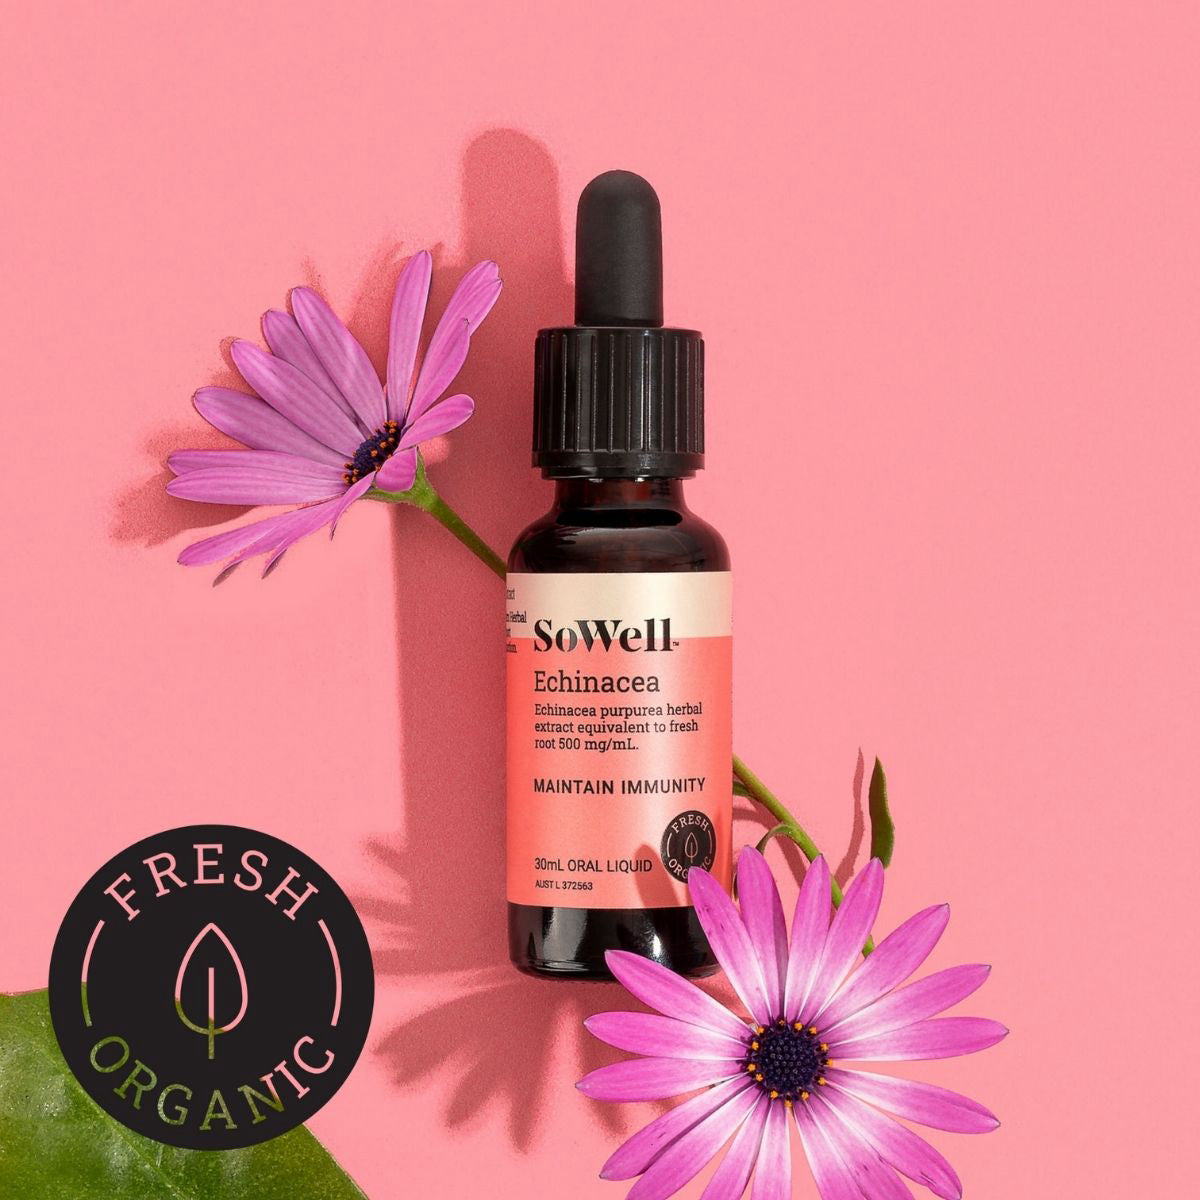 A 30ml dropper bottle of SoWell Echinacea Tincture on a pink background with flower stems surrounding the bottle